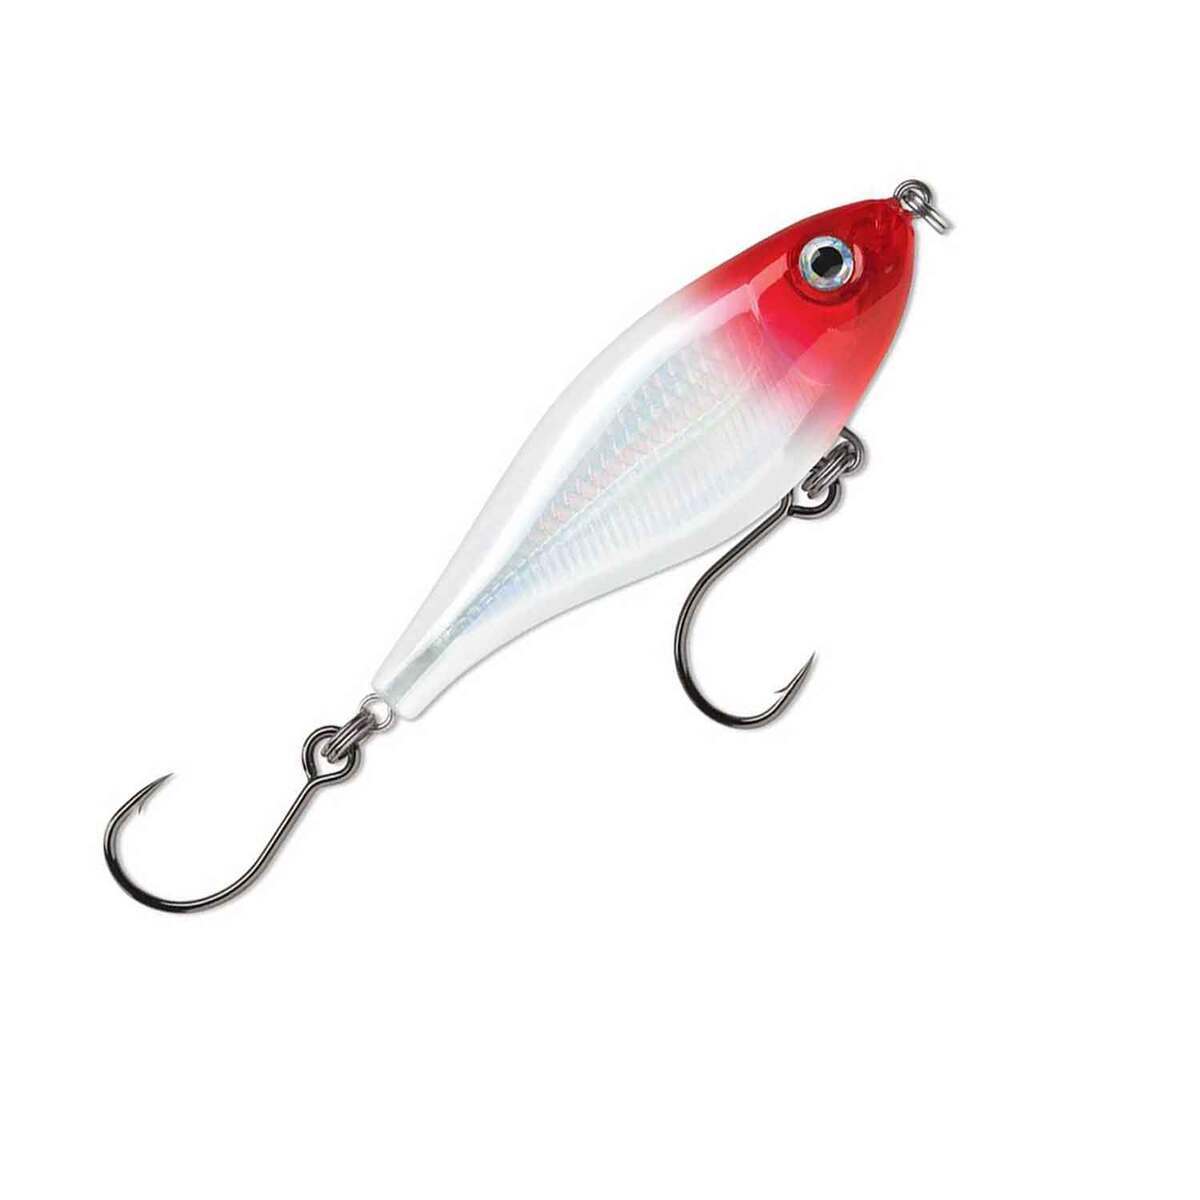 Rapala X-Rap Twitchin' Mullet 06 - Red Ghost